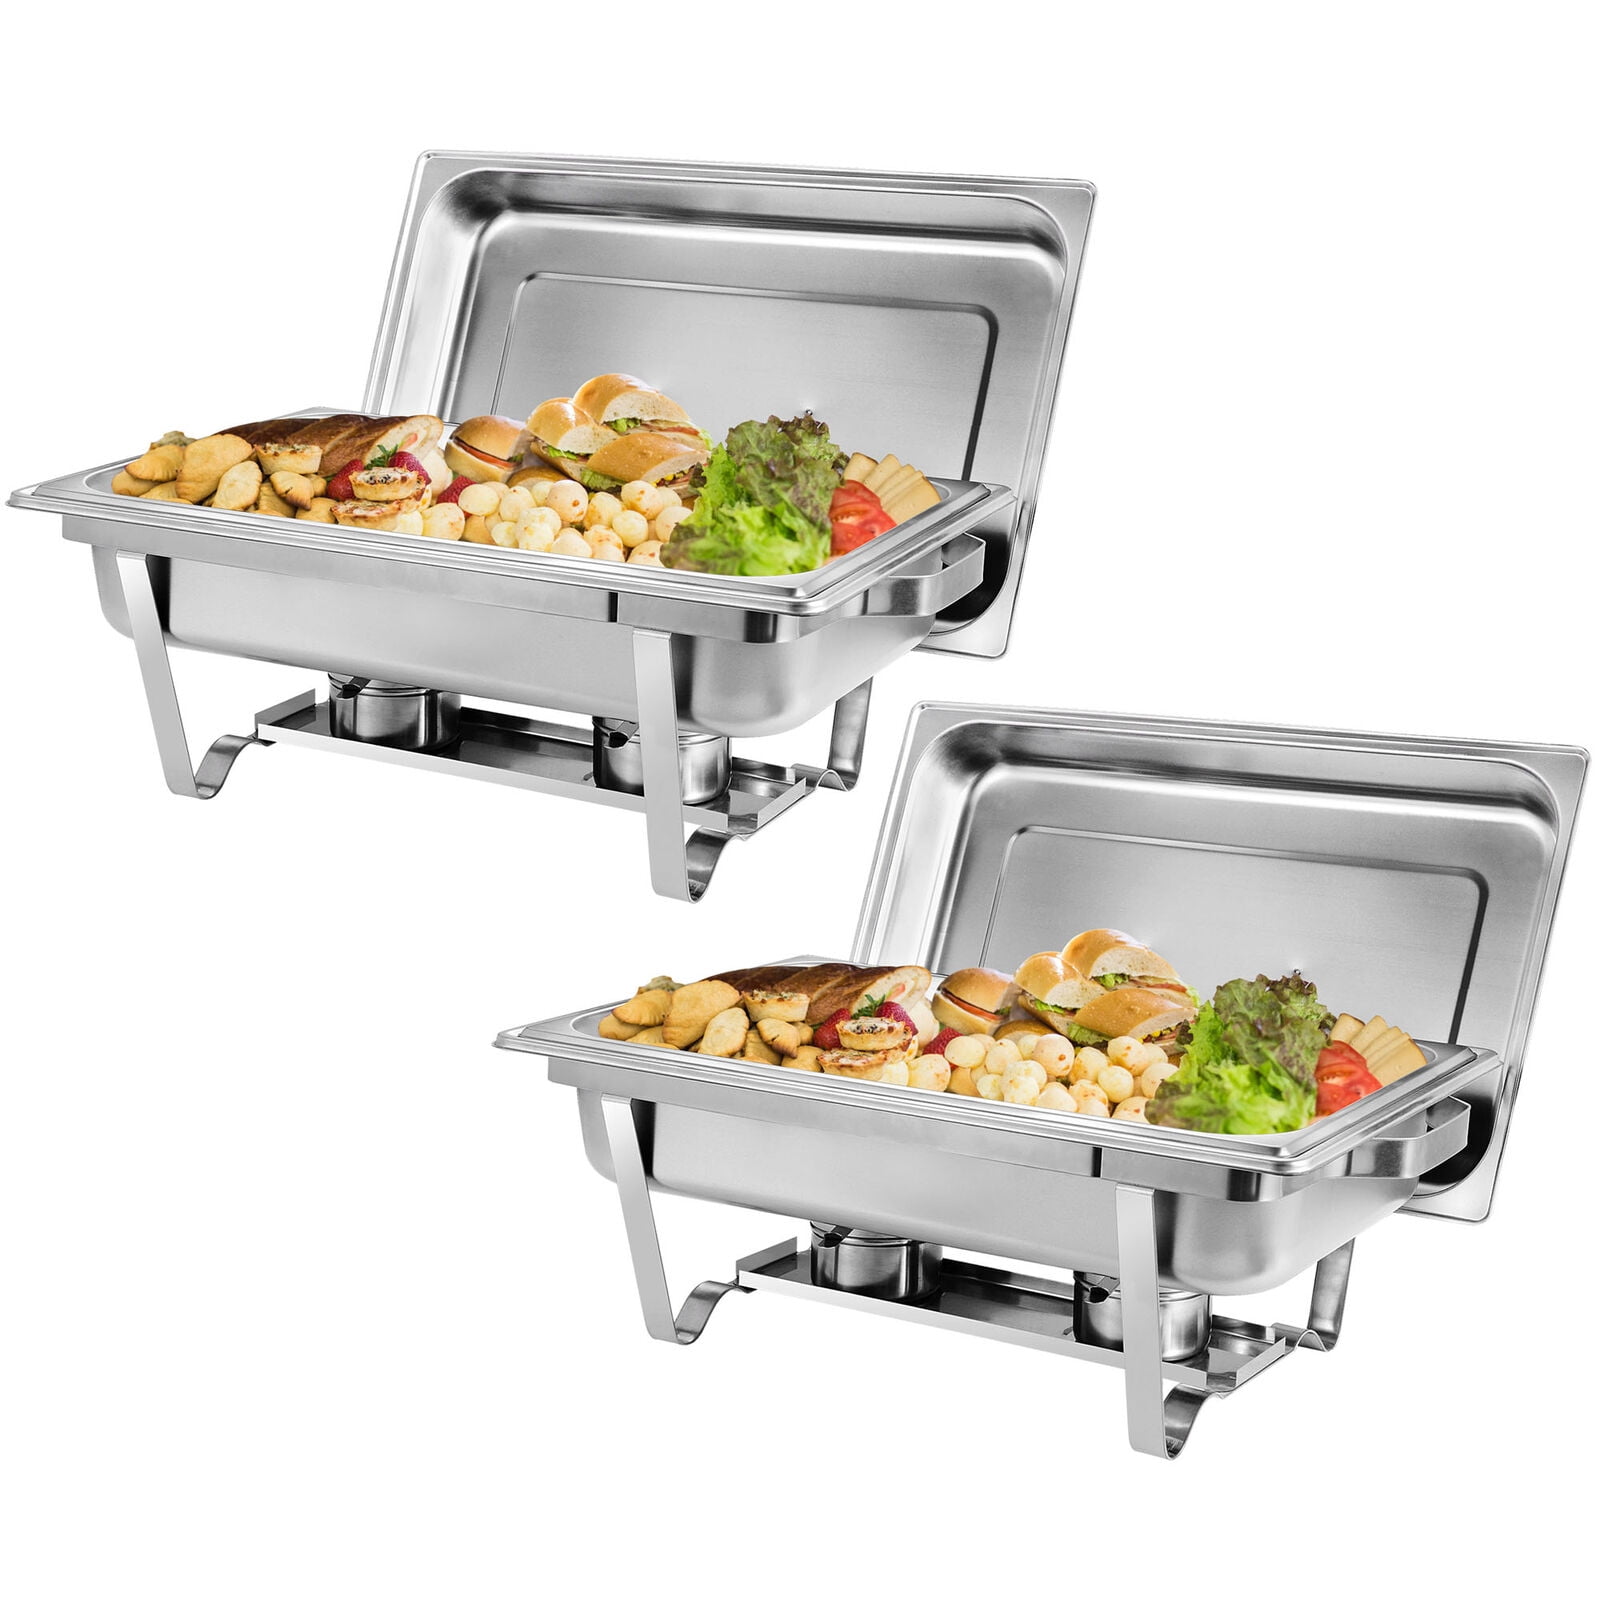 4 PACK CATERING STAINLESS STEEL CHAFER CHAFING DISH SETS 8 QT FULL SIZE BUFFET 